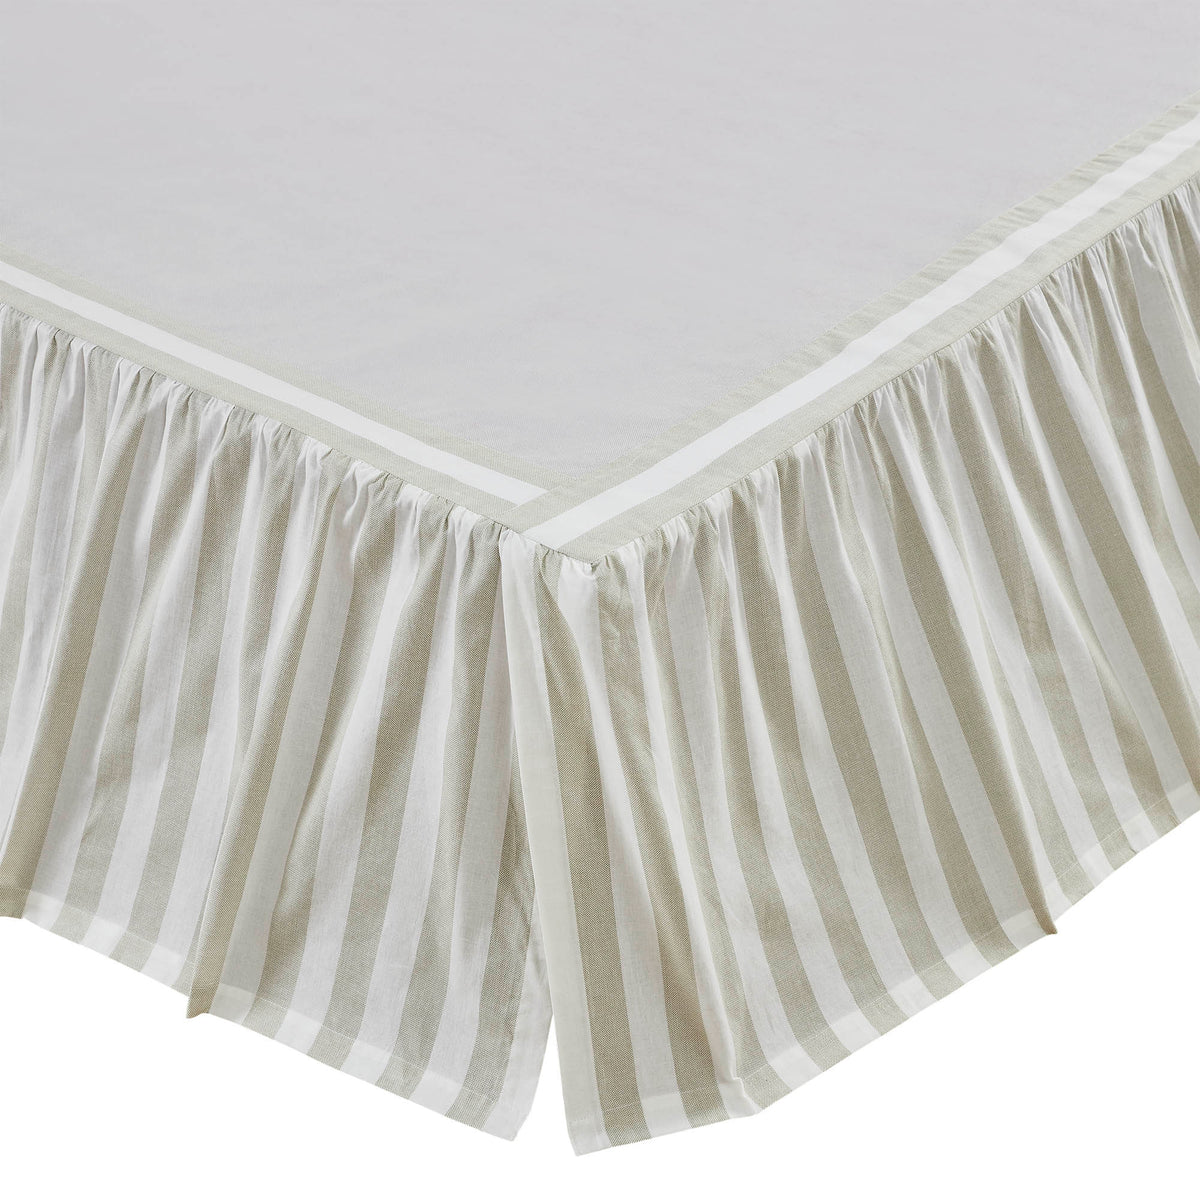 Finders Keepers Ruffled Queen Bed Skirt 60x80x16